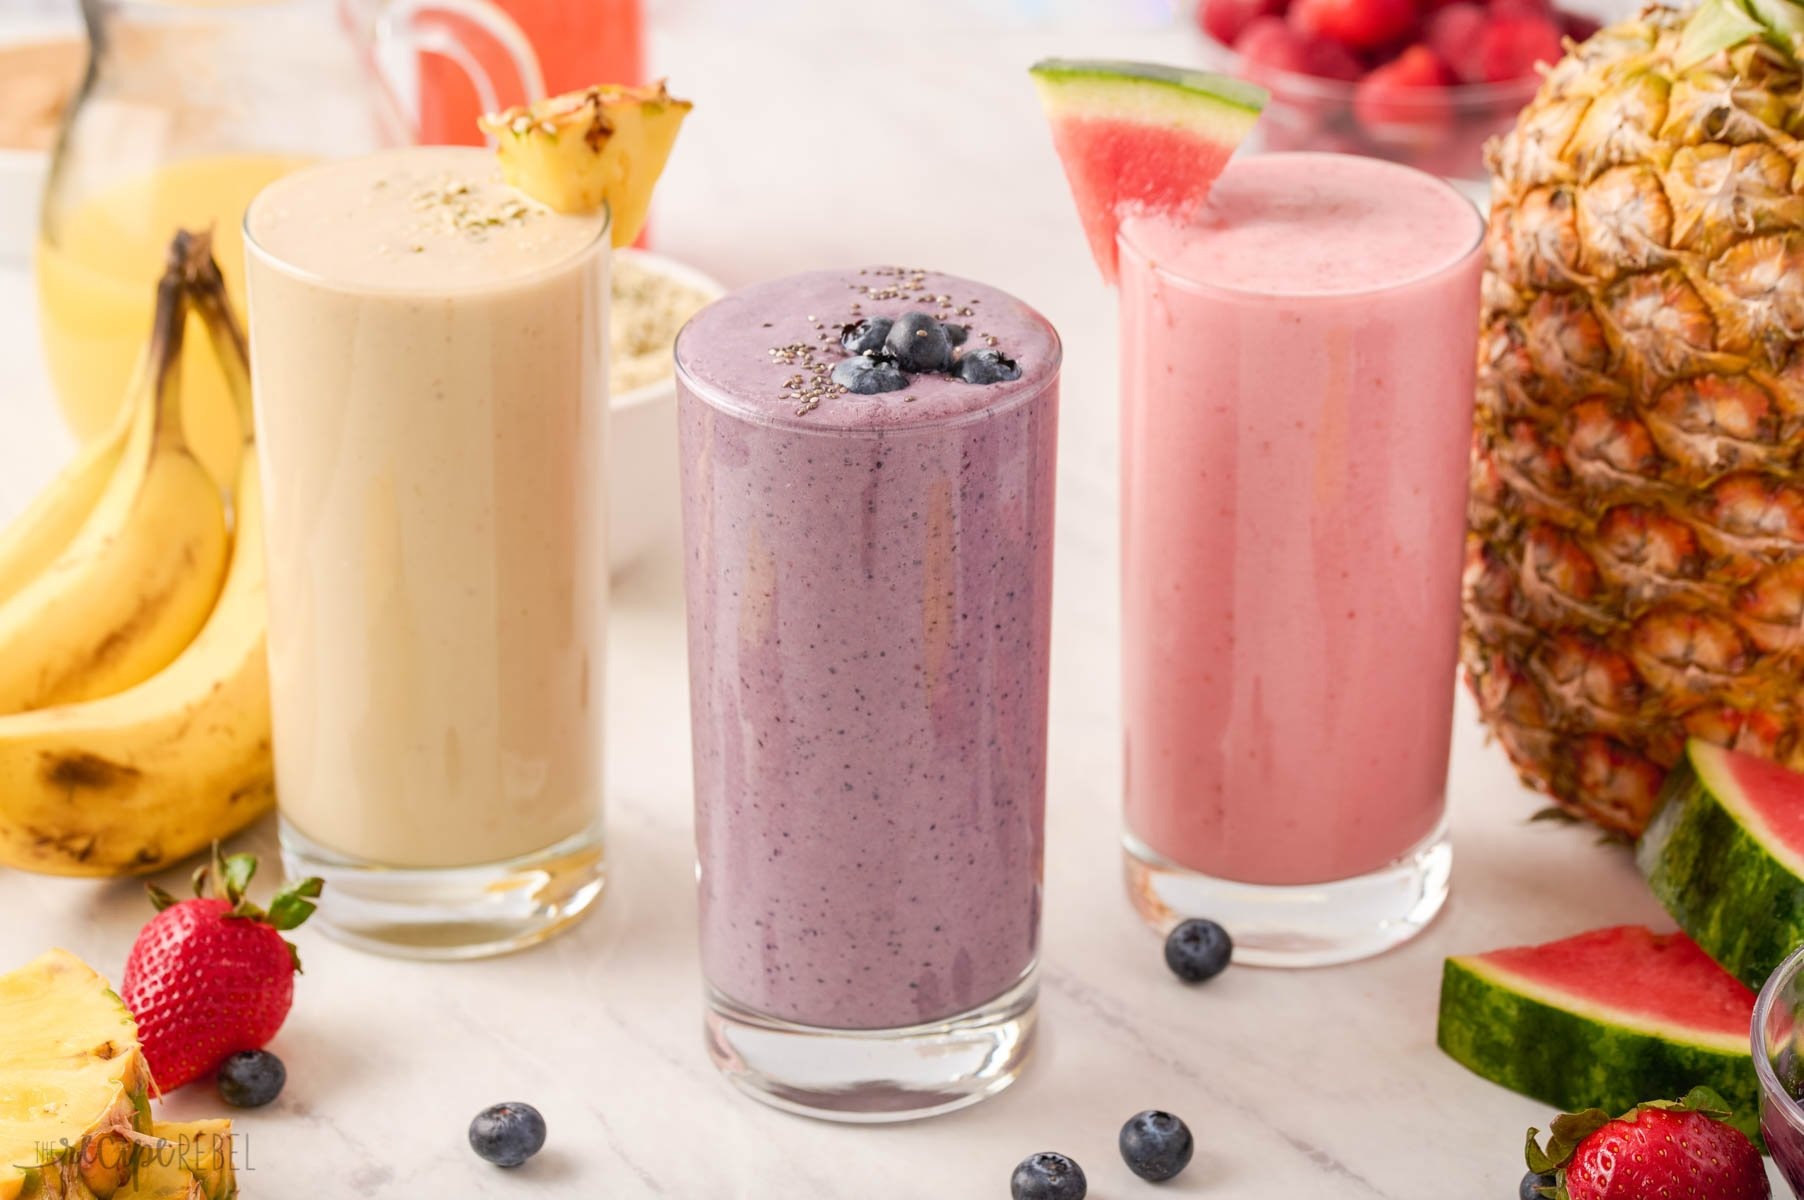 Want to Indulge in Homemade Shakes? Order Your Ingredients through Online Grocery Shopping